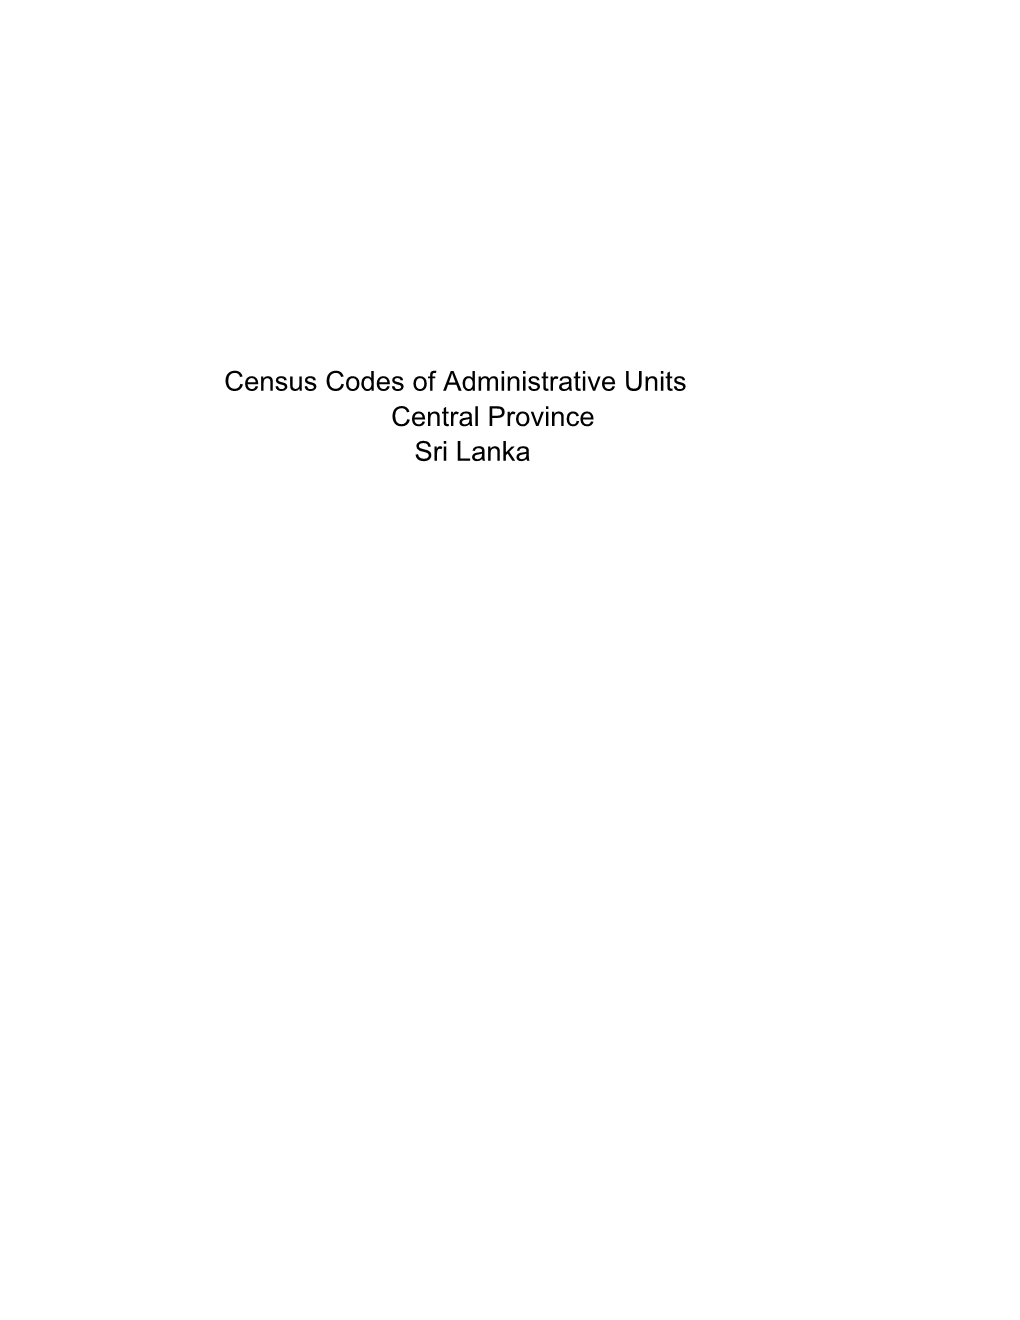 Census Codes of Administrative Units Central Province Sri Lanka Province District DS Division GN Division Name Code Name Code Name Code Name No